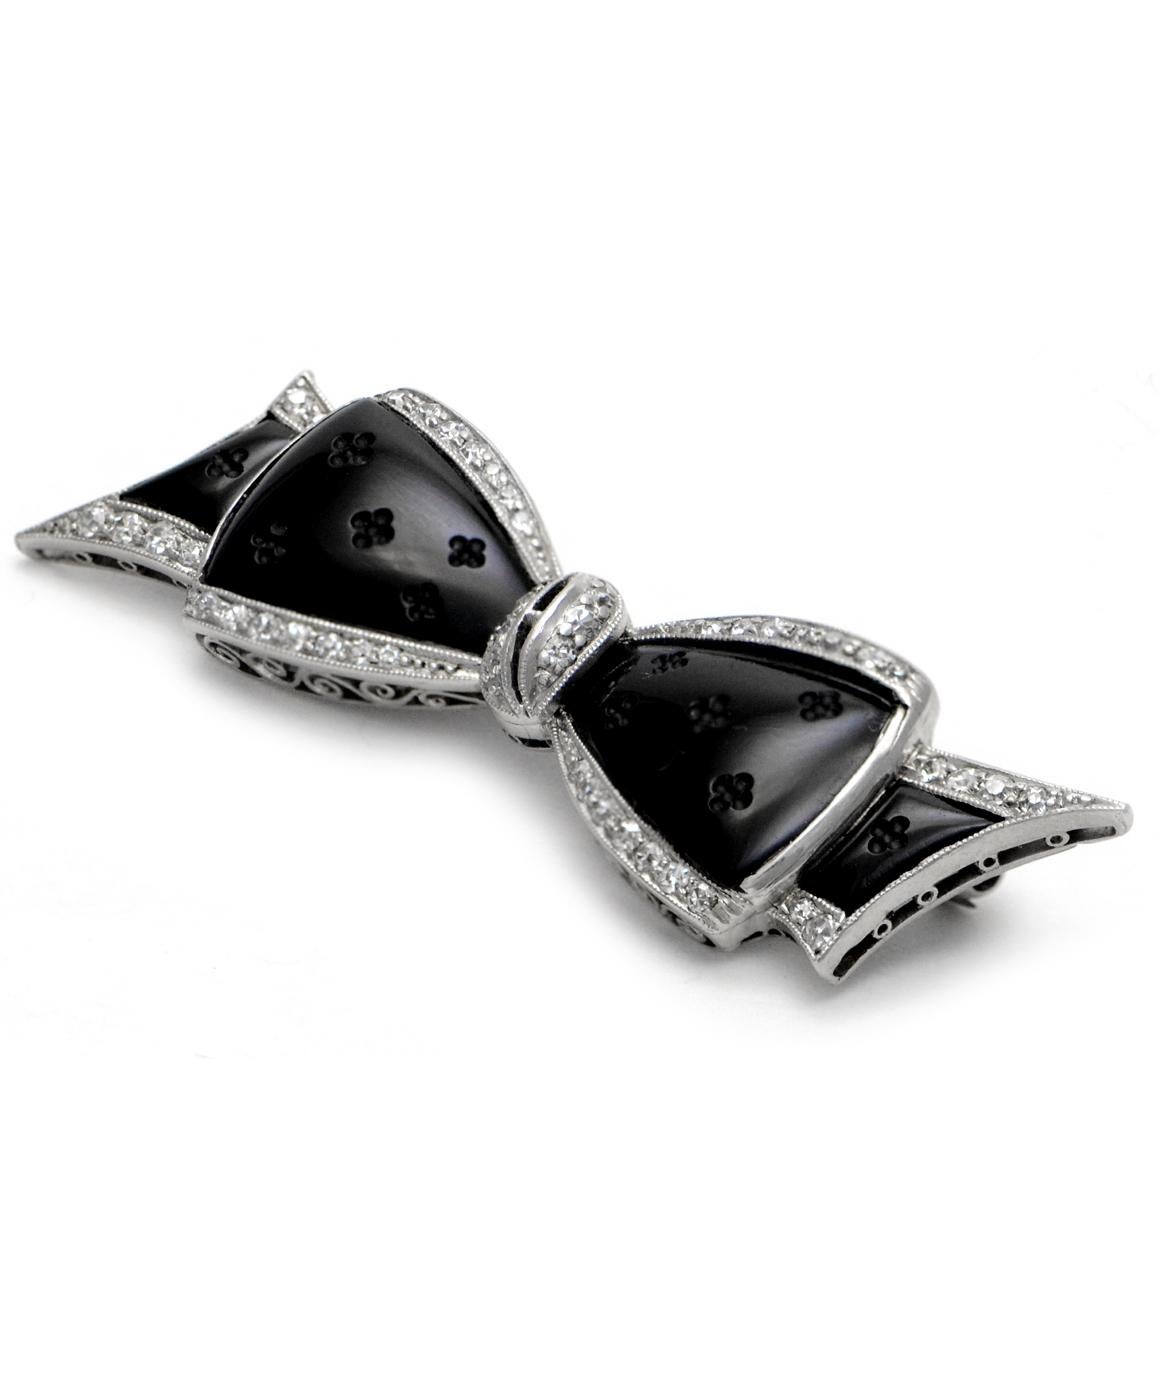 100% Authentic J.E Caldwell & Co Pure Platinum Designer Diamond & Carved Onyx Bow Brooch 7.3 grams 
This stunning designer brooch weighs 7.3 grams, and measures about 2.00